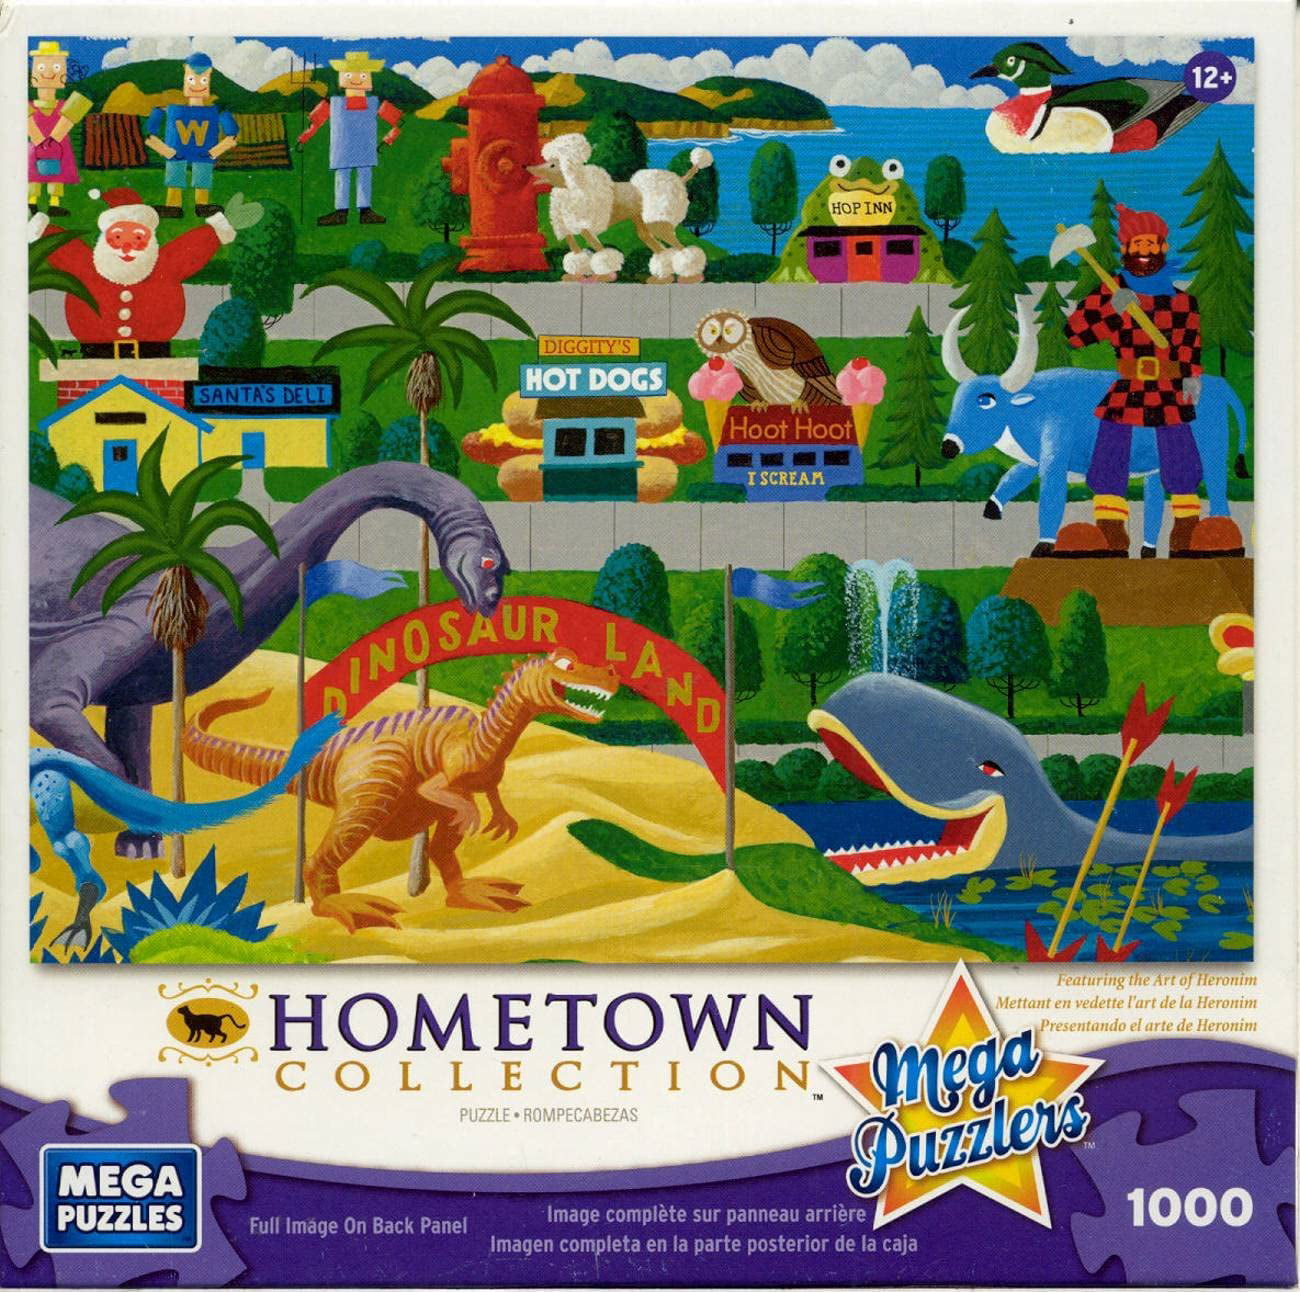 MEGA Hometown Collection Roadside Icons Jigsaw Puzzle 1000 Pieces for sale online